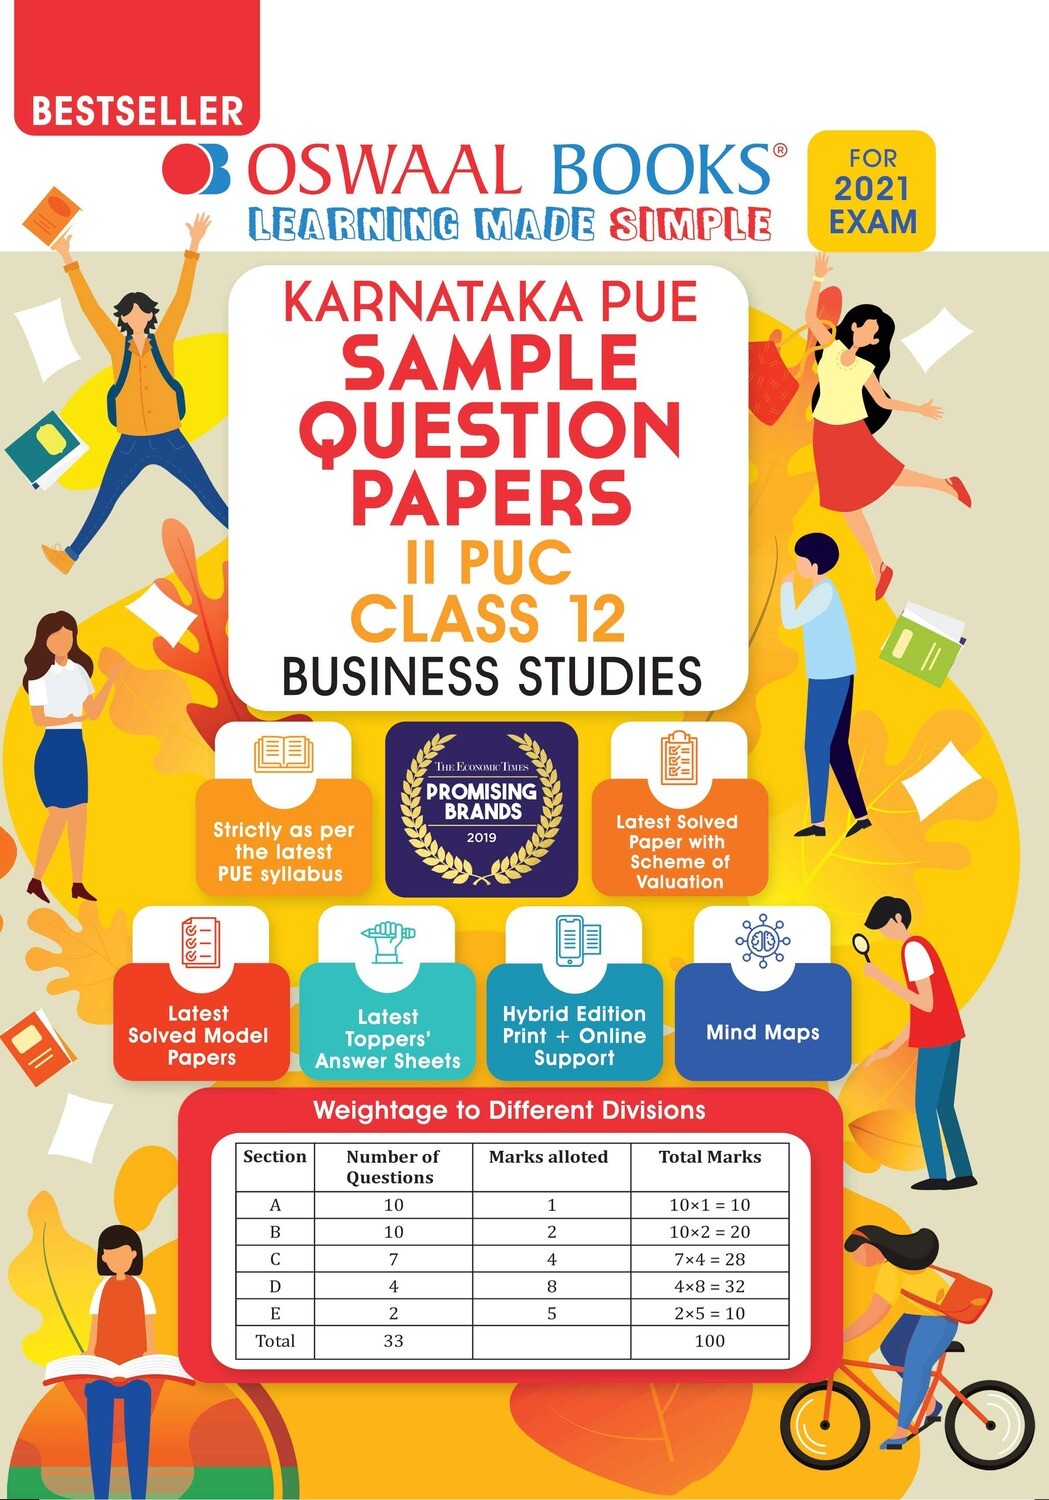 Buy e-book: Oswaal Karnataka PUE Sample Question Papers II PUC Class 12 Business Studies (For 2021 Exam)